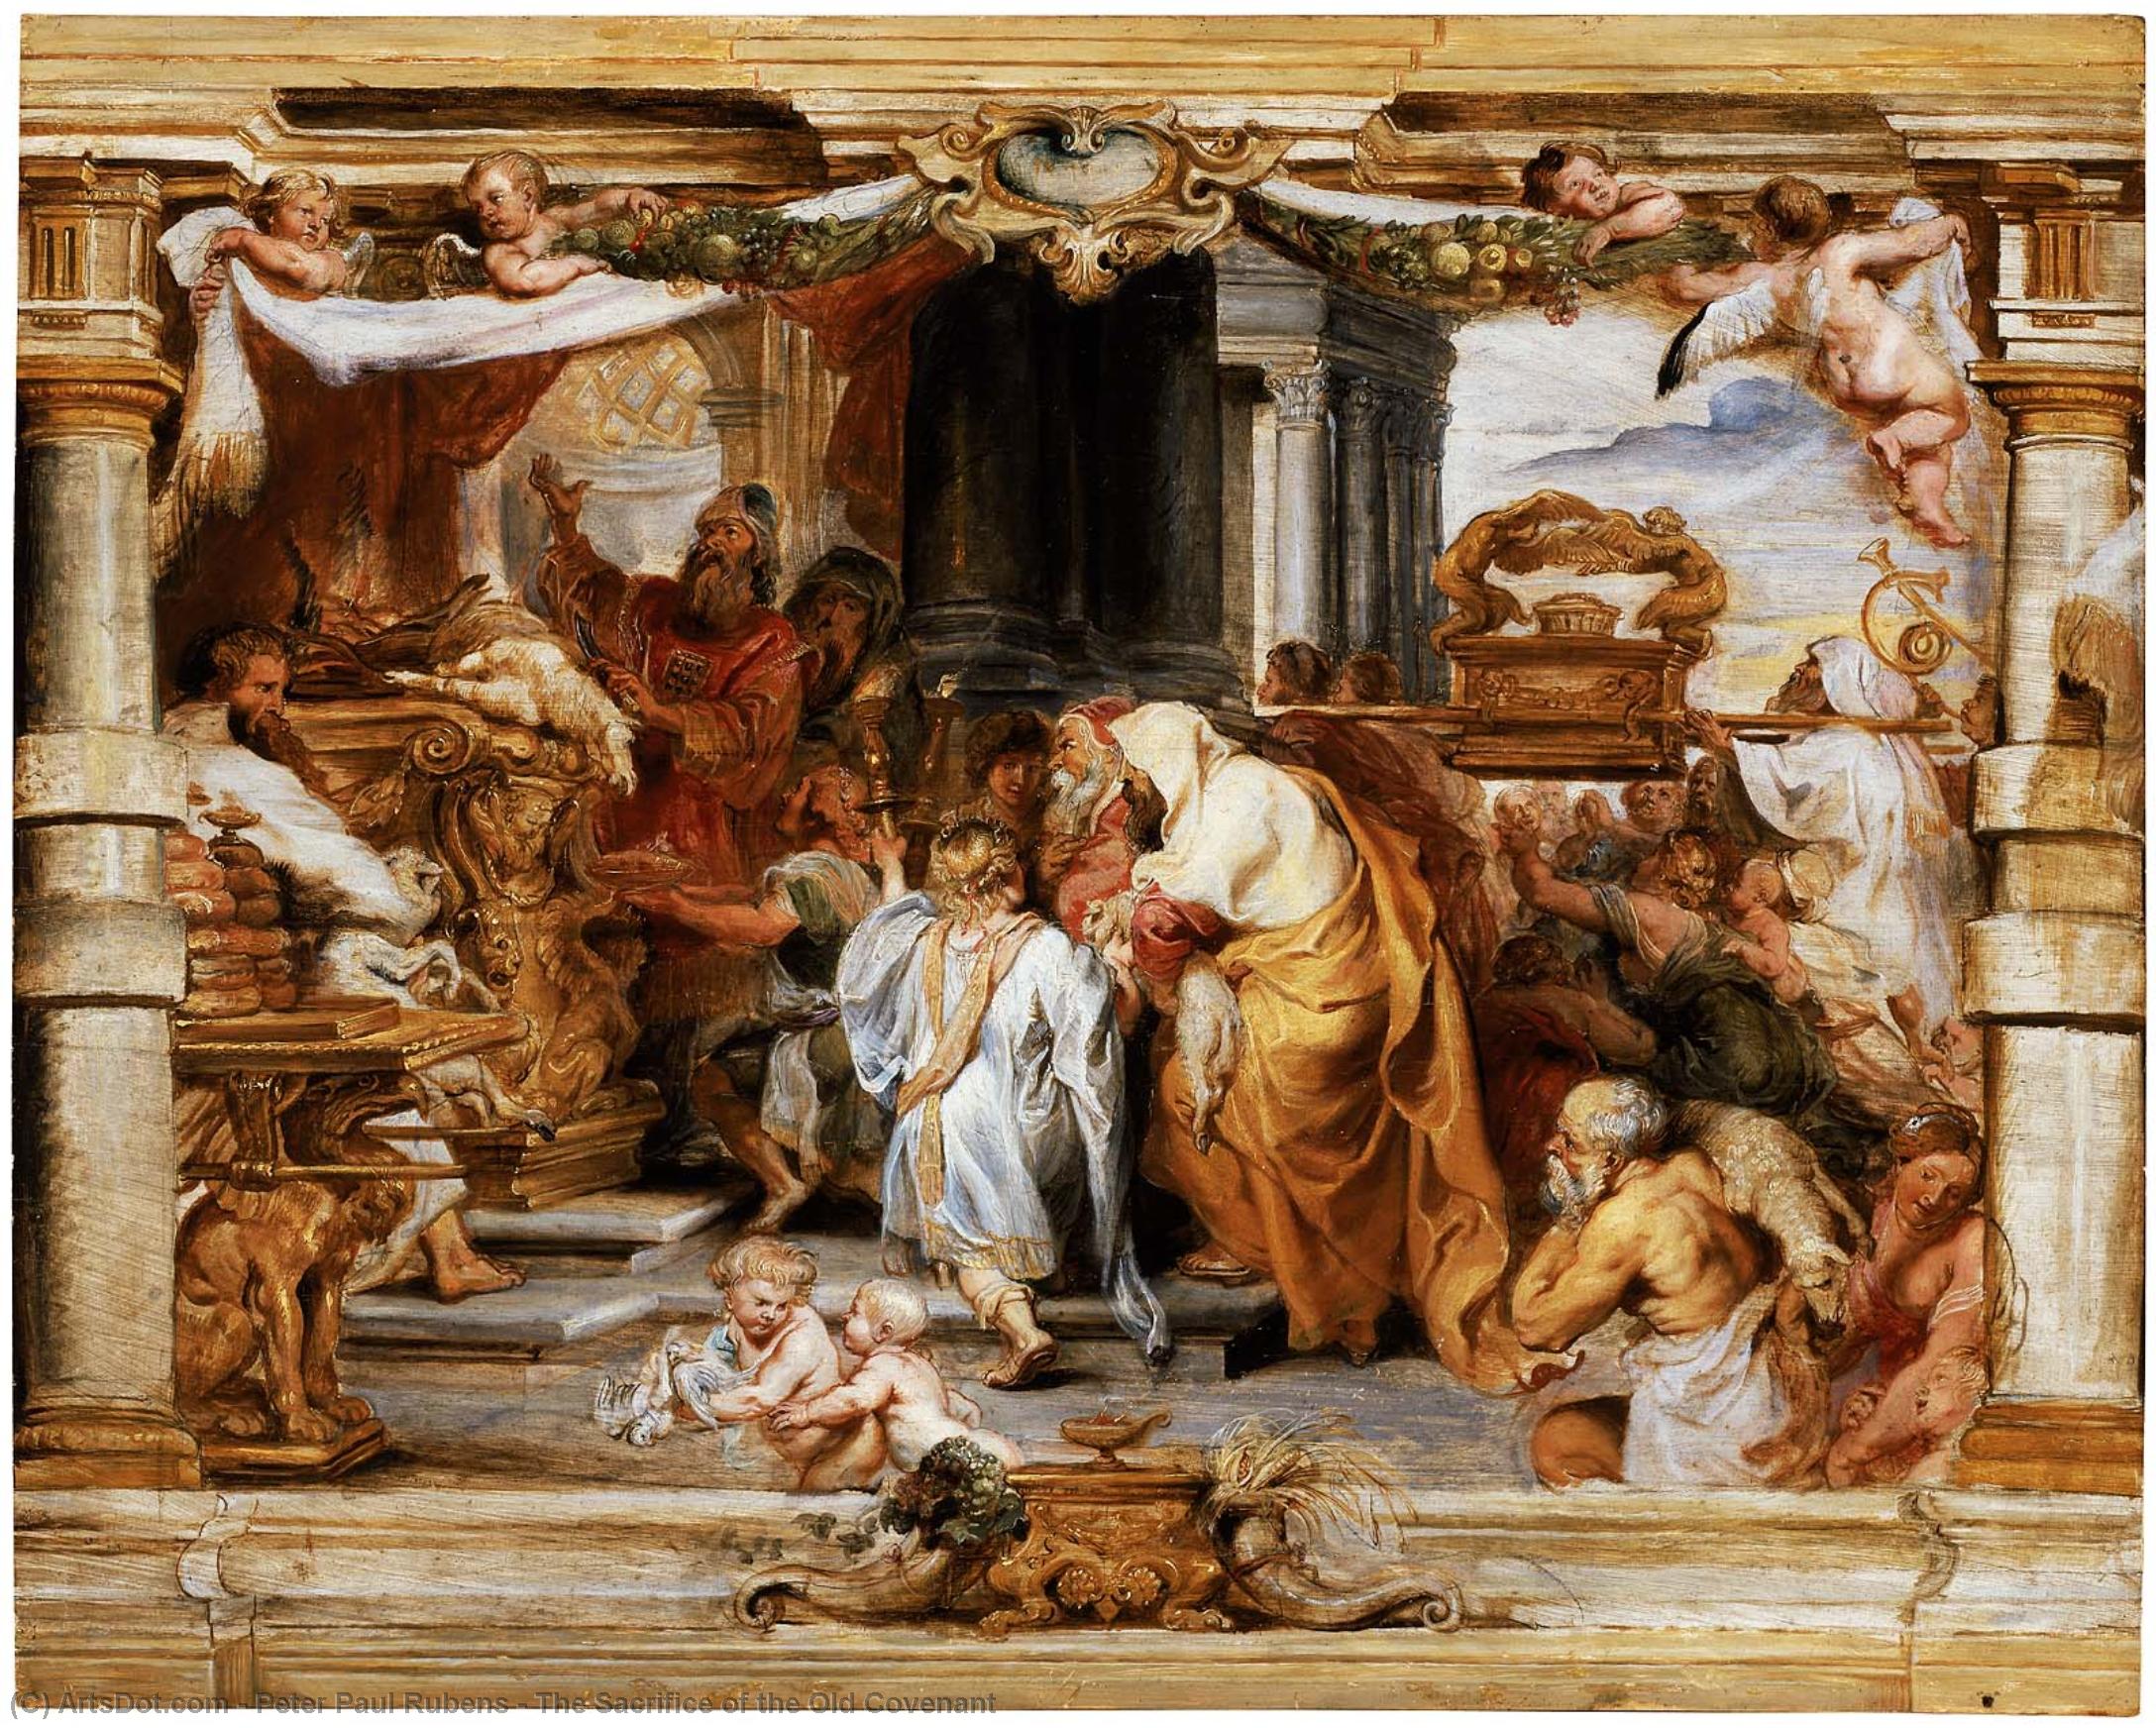 Wikioo.org - สารานุกรมวิจิตรศิลป์ - จิตรกรรม Peter Paul Rubens - The Sacrifice of the Old Covenant